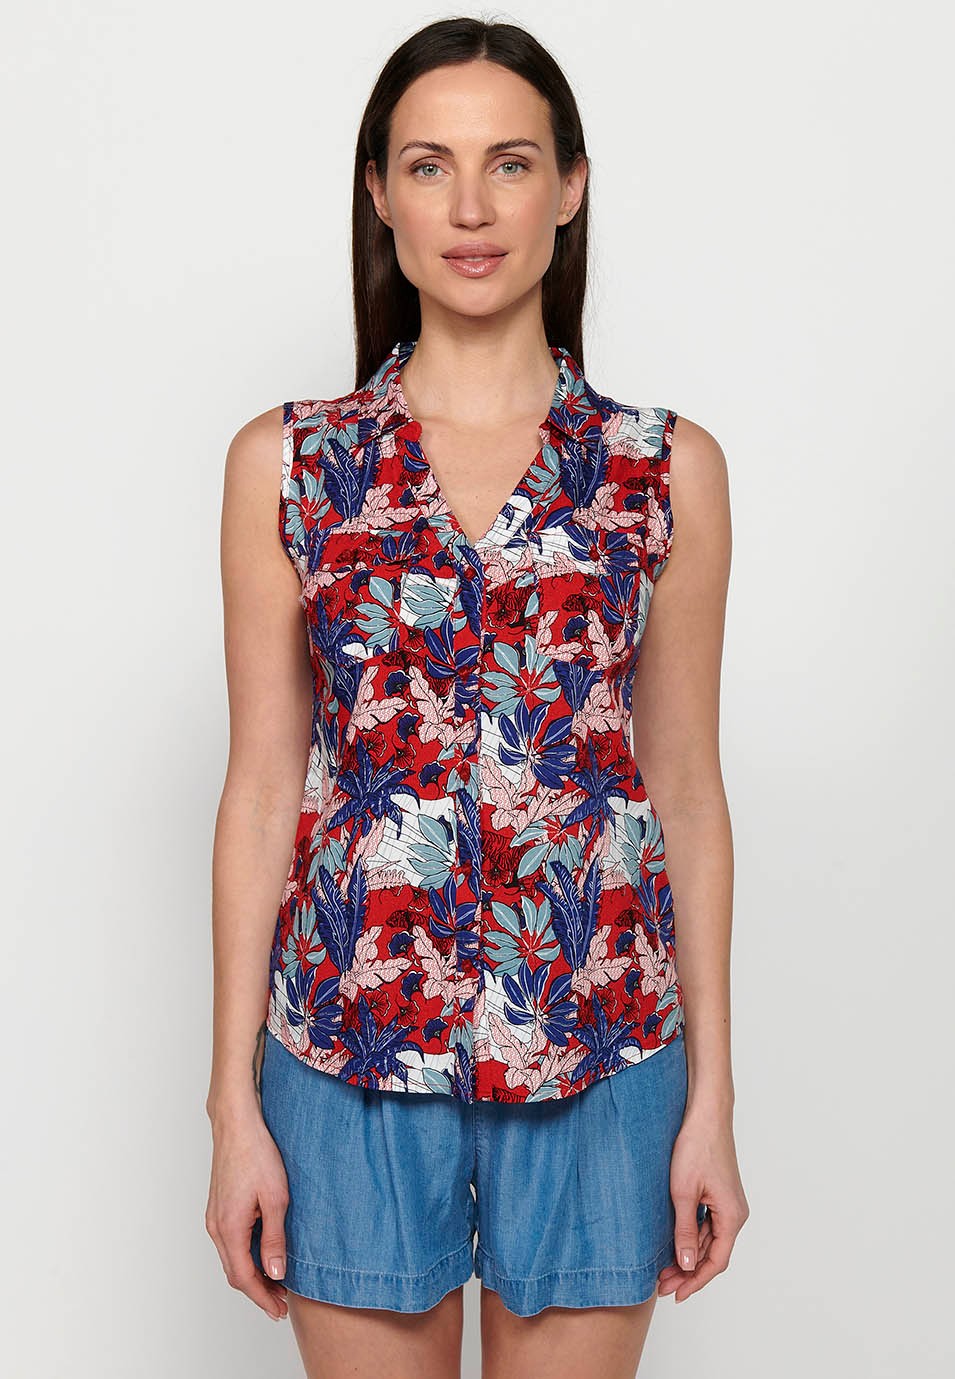 Women's Sleeveless V Neck Button Front Closure Floral Print Blouse Tops